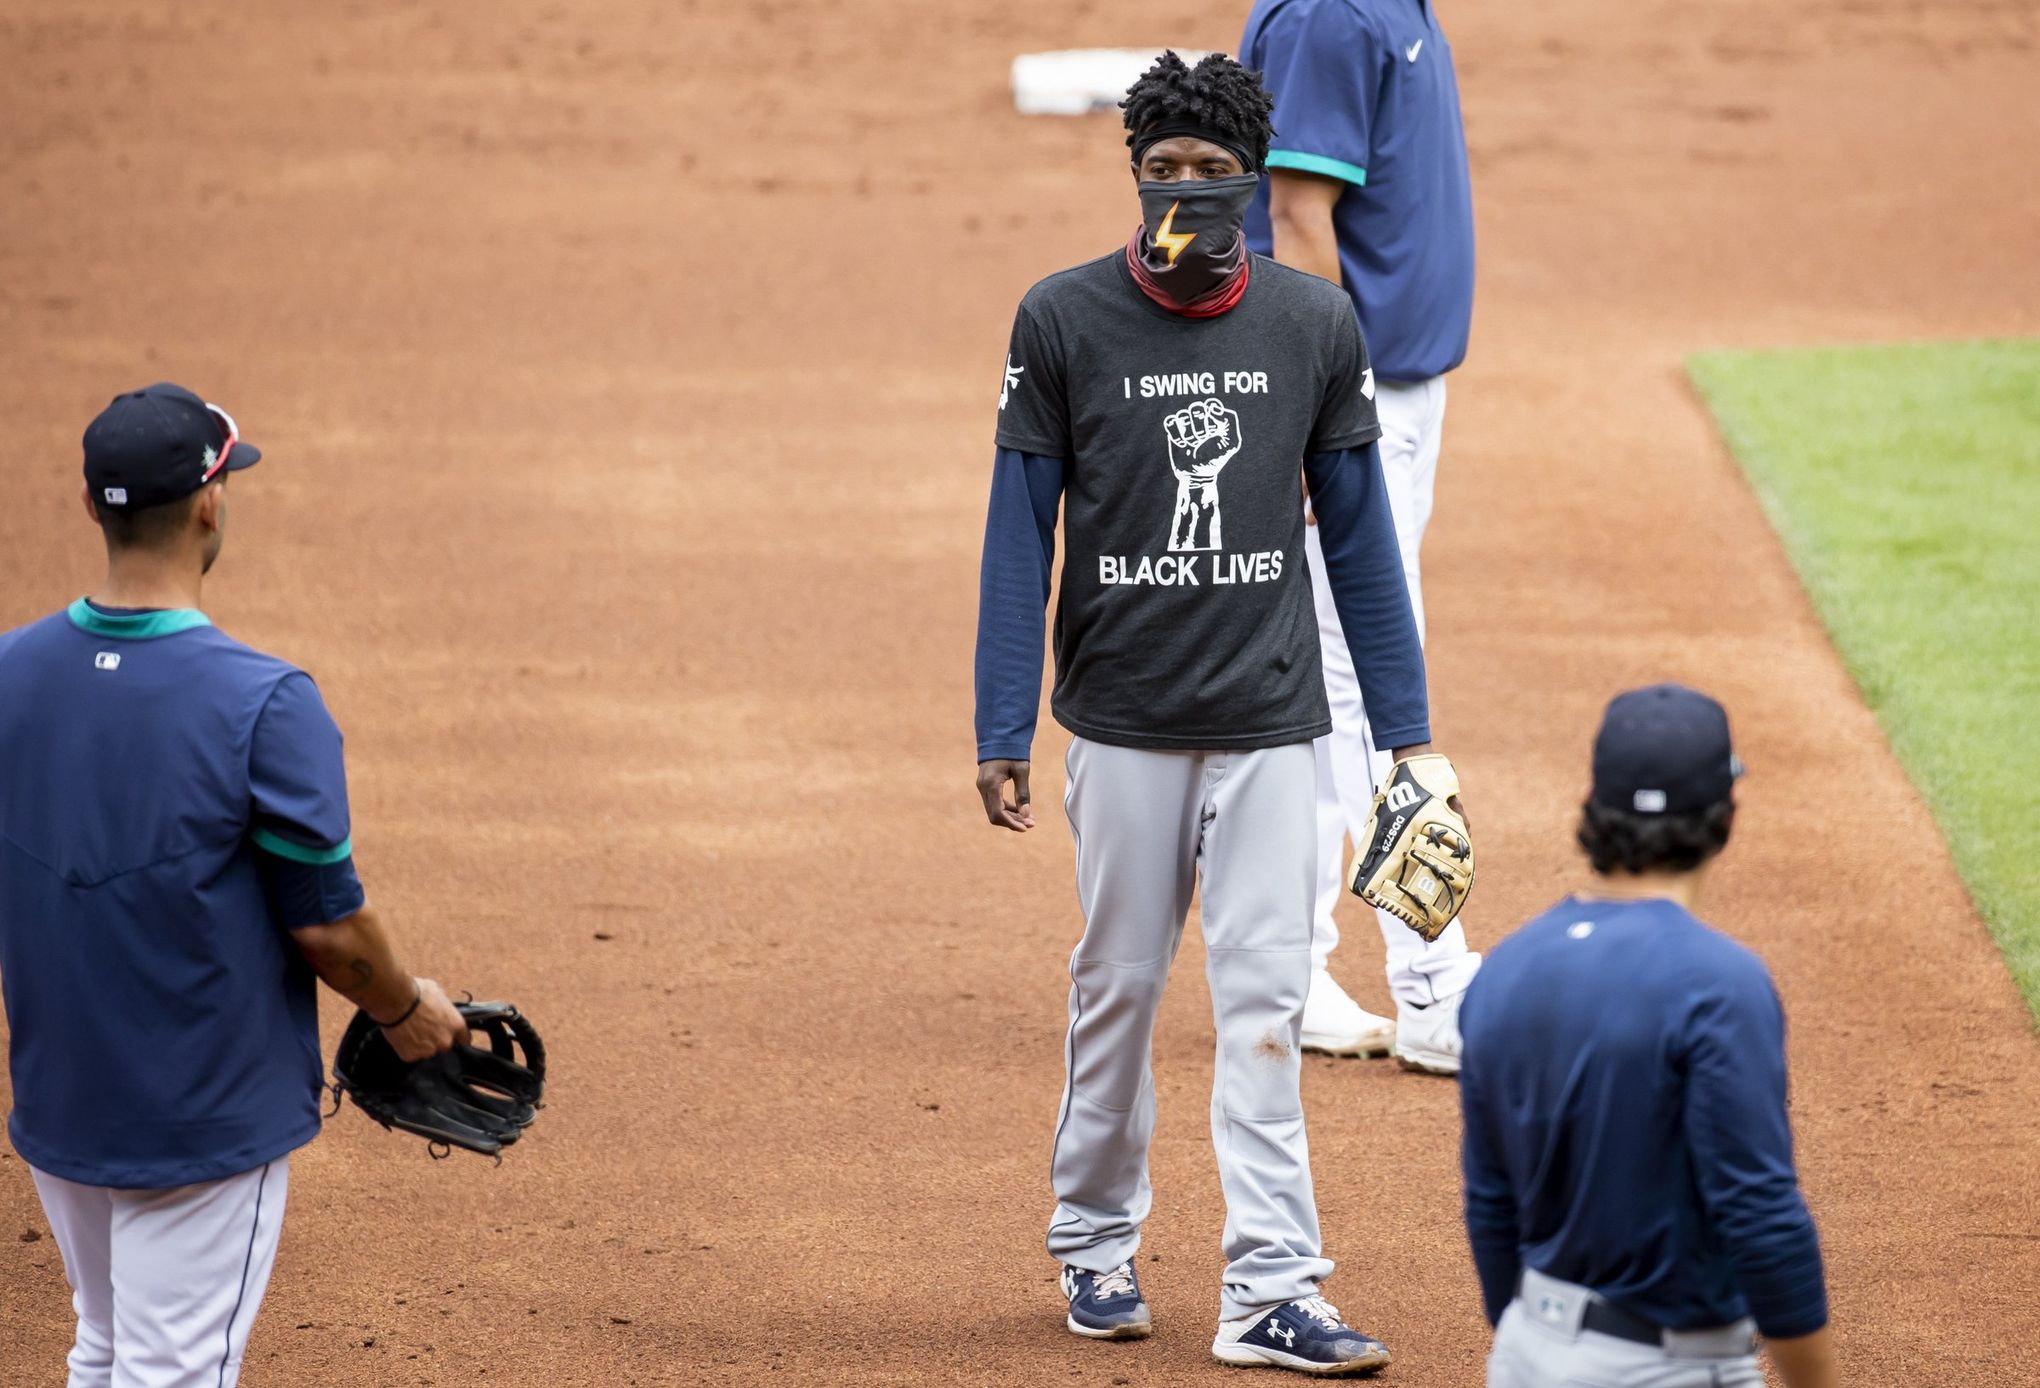 We're going to get it right': Mariners' Dee Gordon, Players Alliance work  toward equality for Black players in baseball